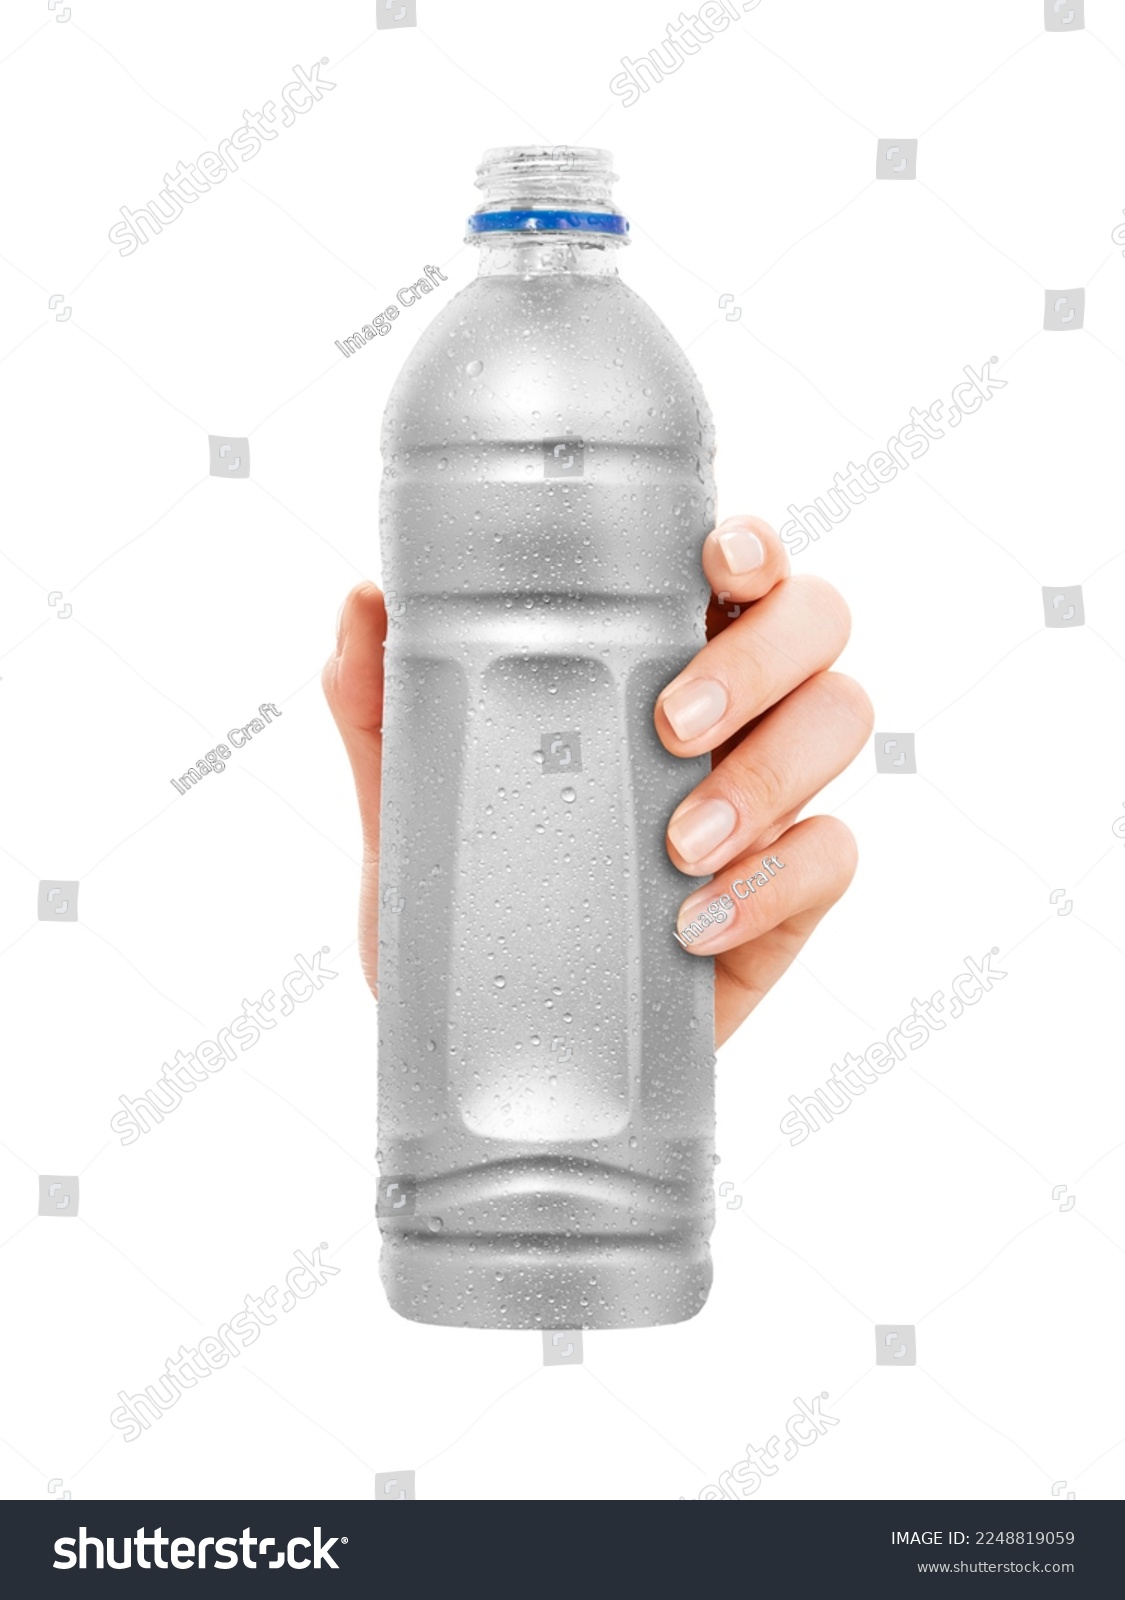 Close-up of hand holding Empty plastic Bottle with condensation. isolated on white Background. front view. #2248819059